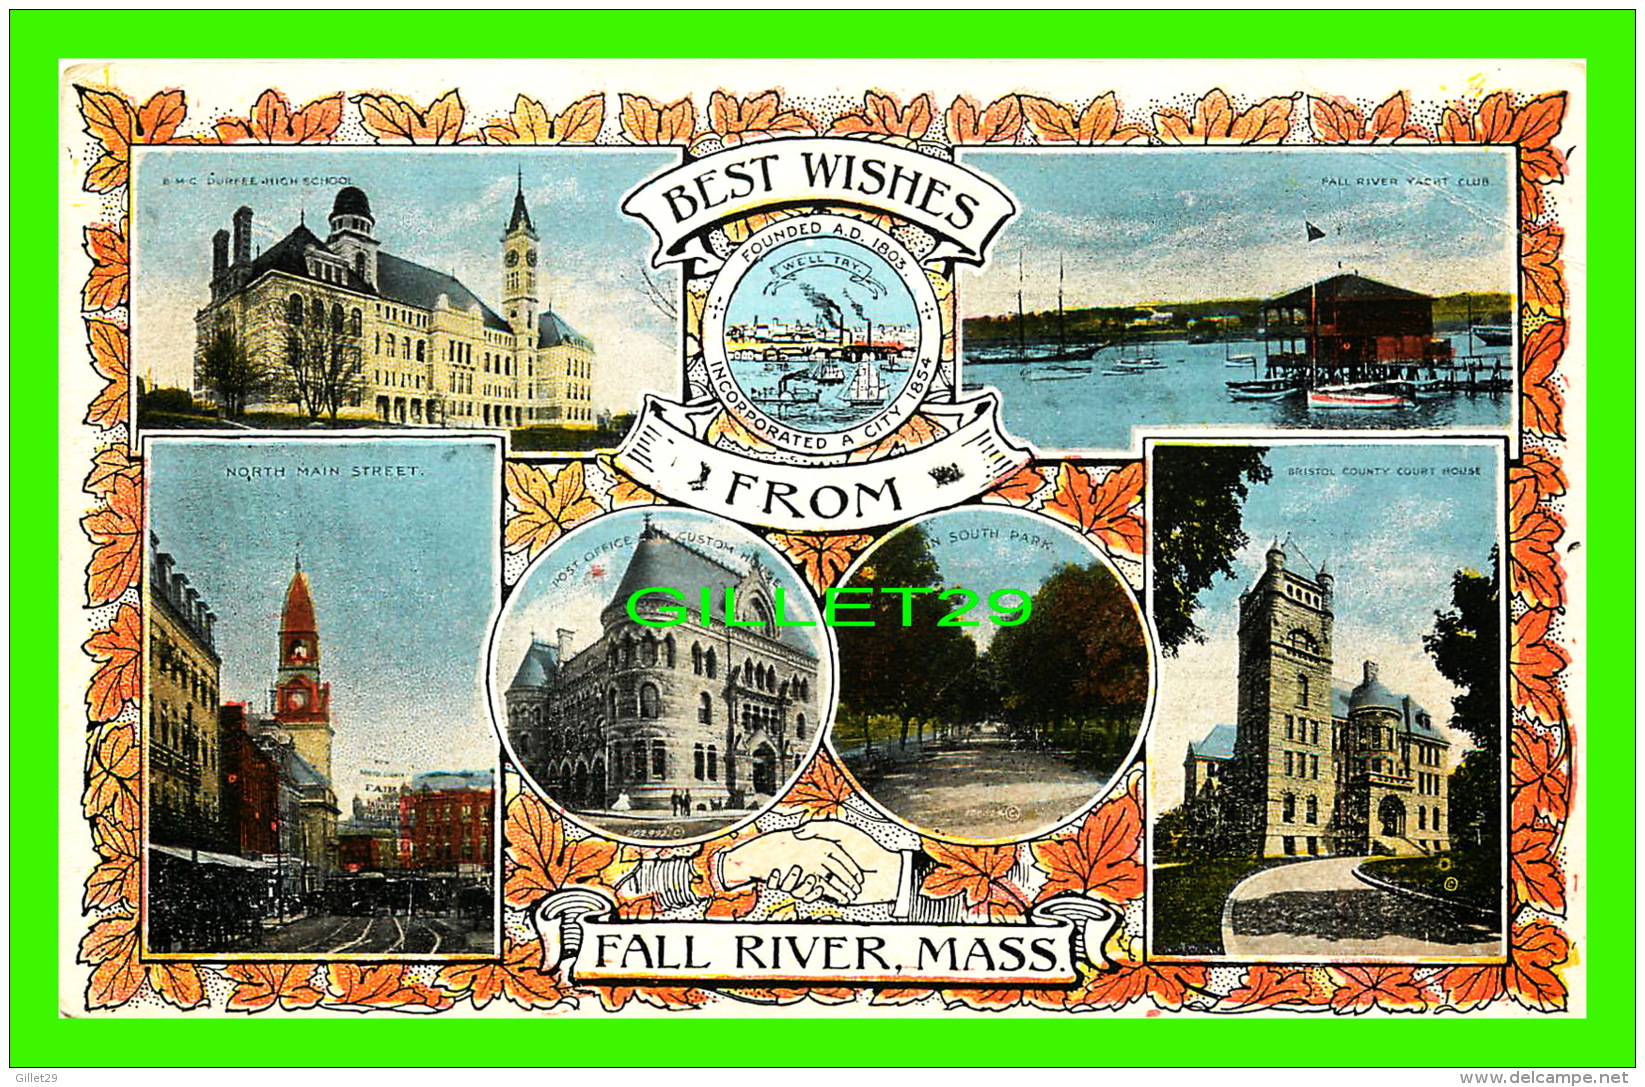 FALL RIVER, MA -  BEST WISHES FROM - 7 MULTIVUES - TRAVEL IN 1906 -  PUB. BY THE CITY NEWS CO - - Fall River